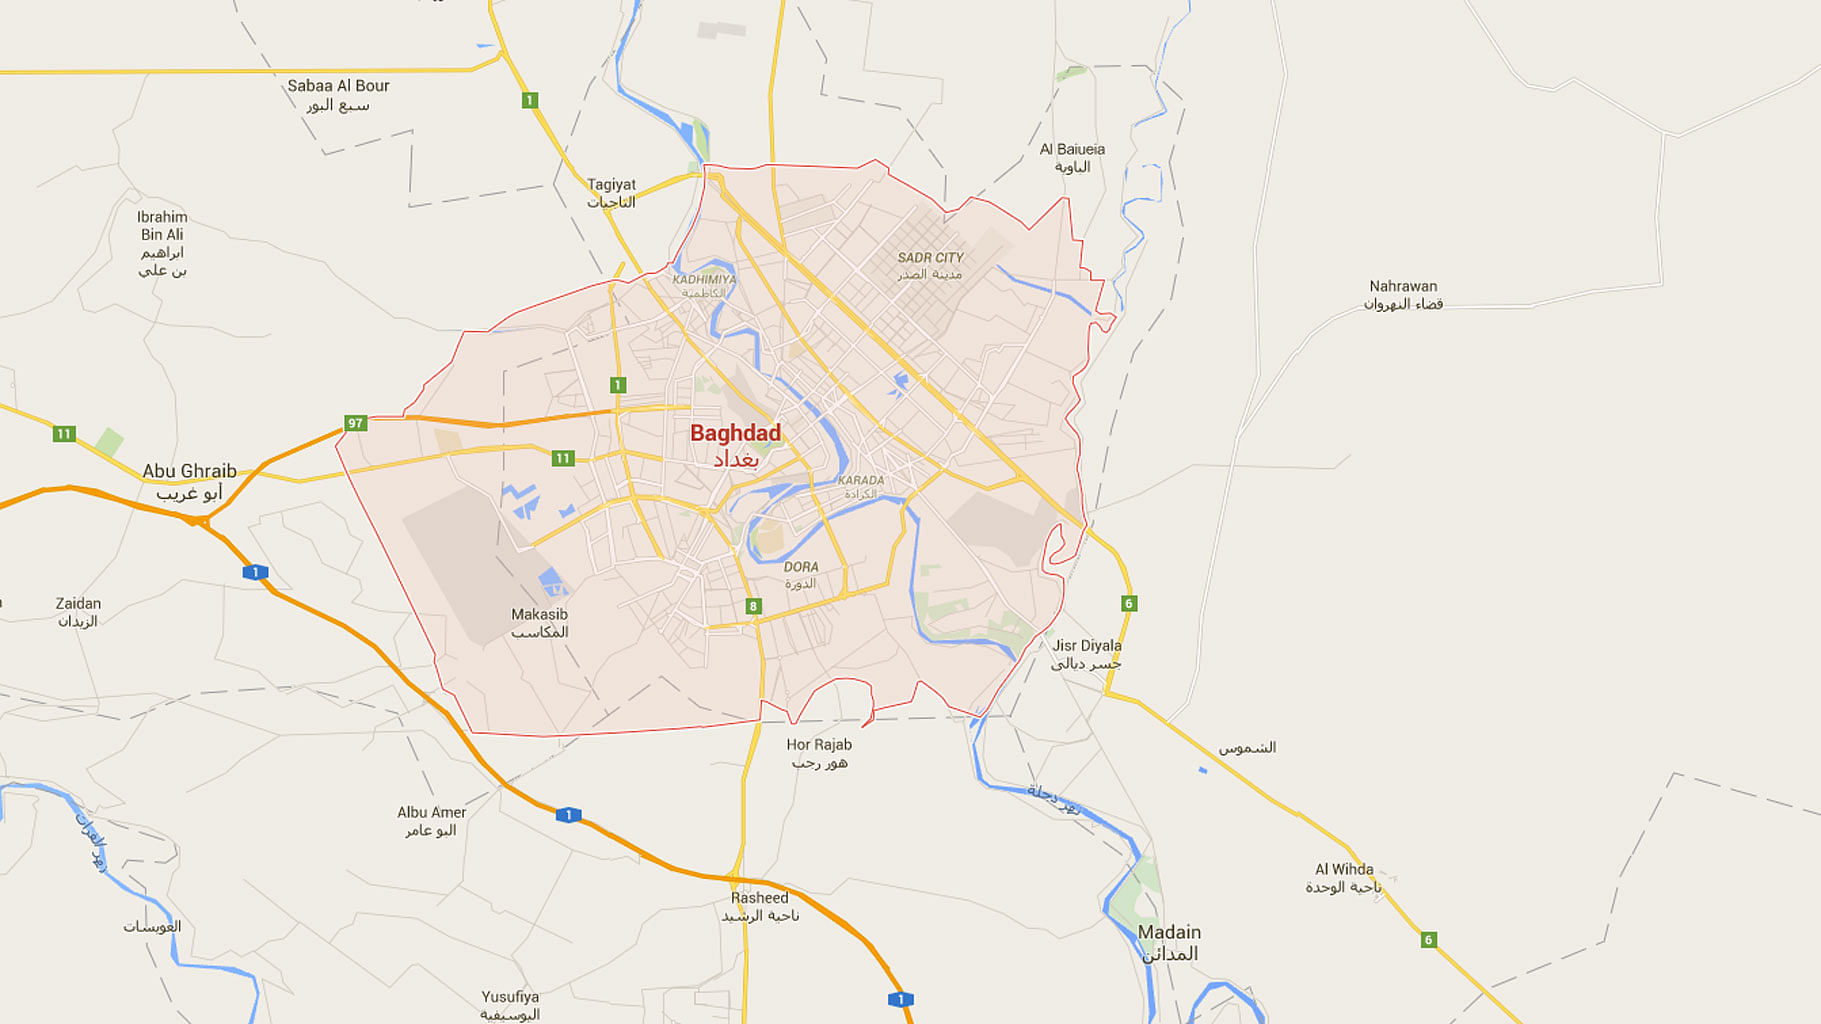 The city of Baghdad as seen on Google Maps.